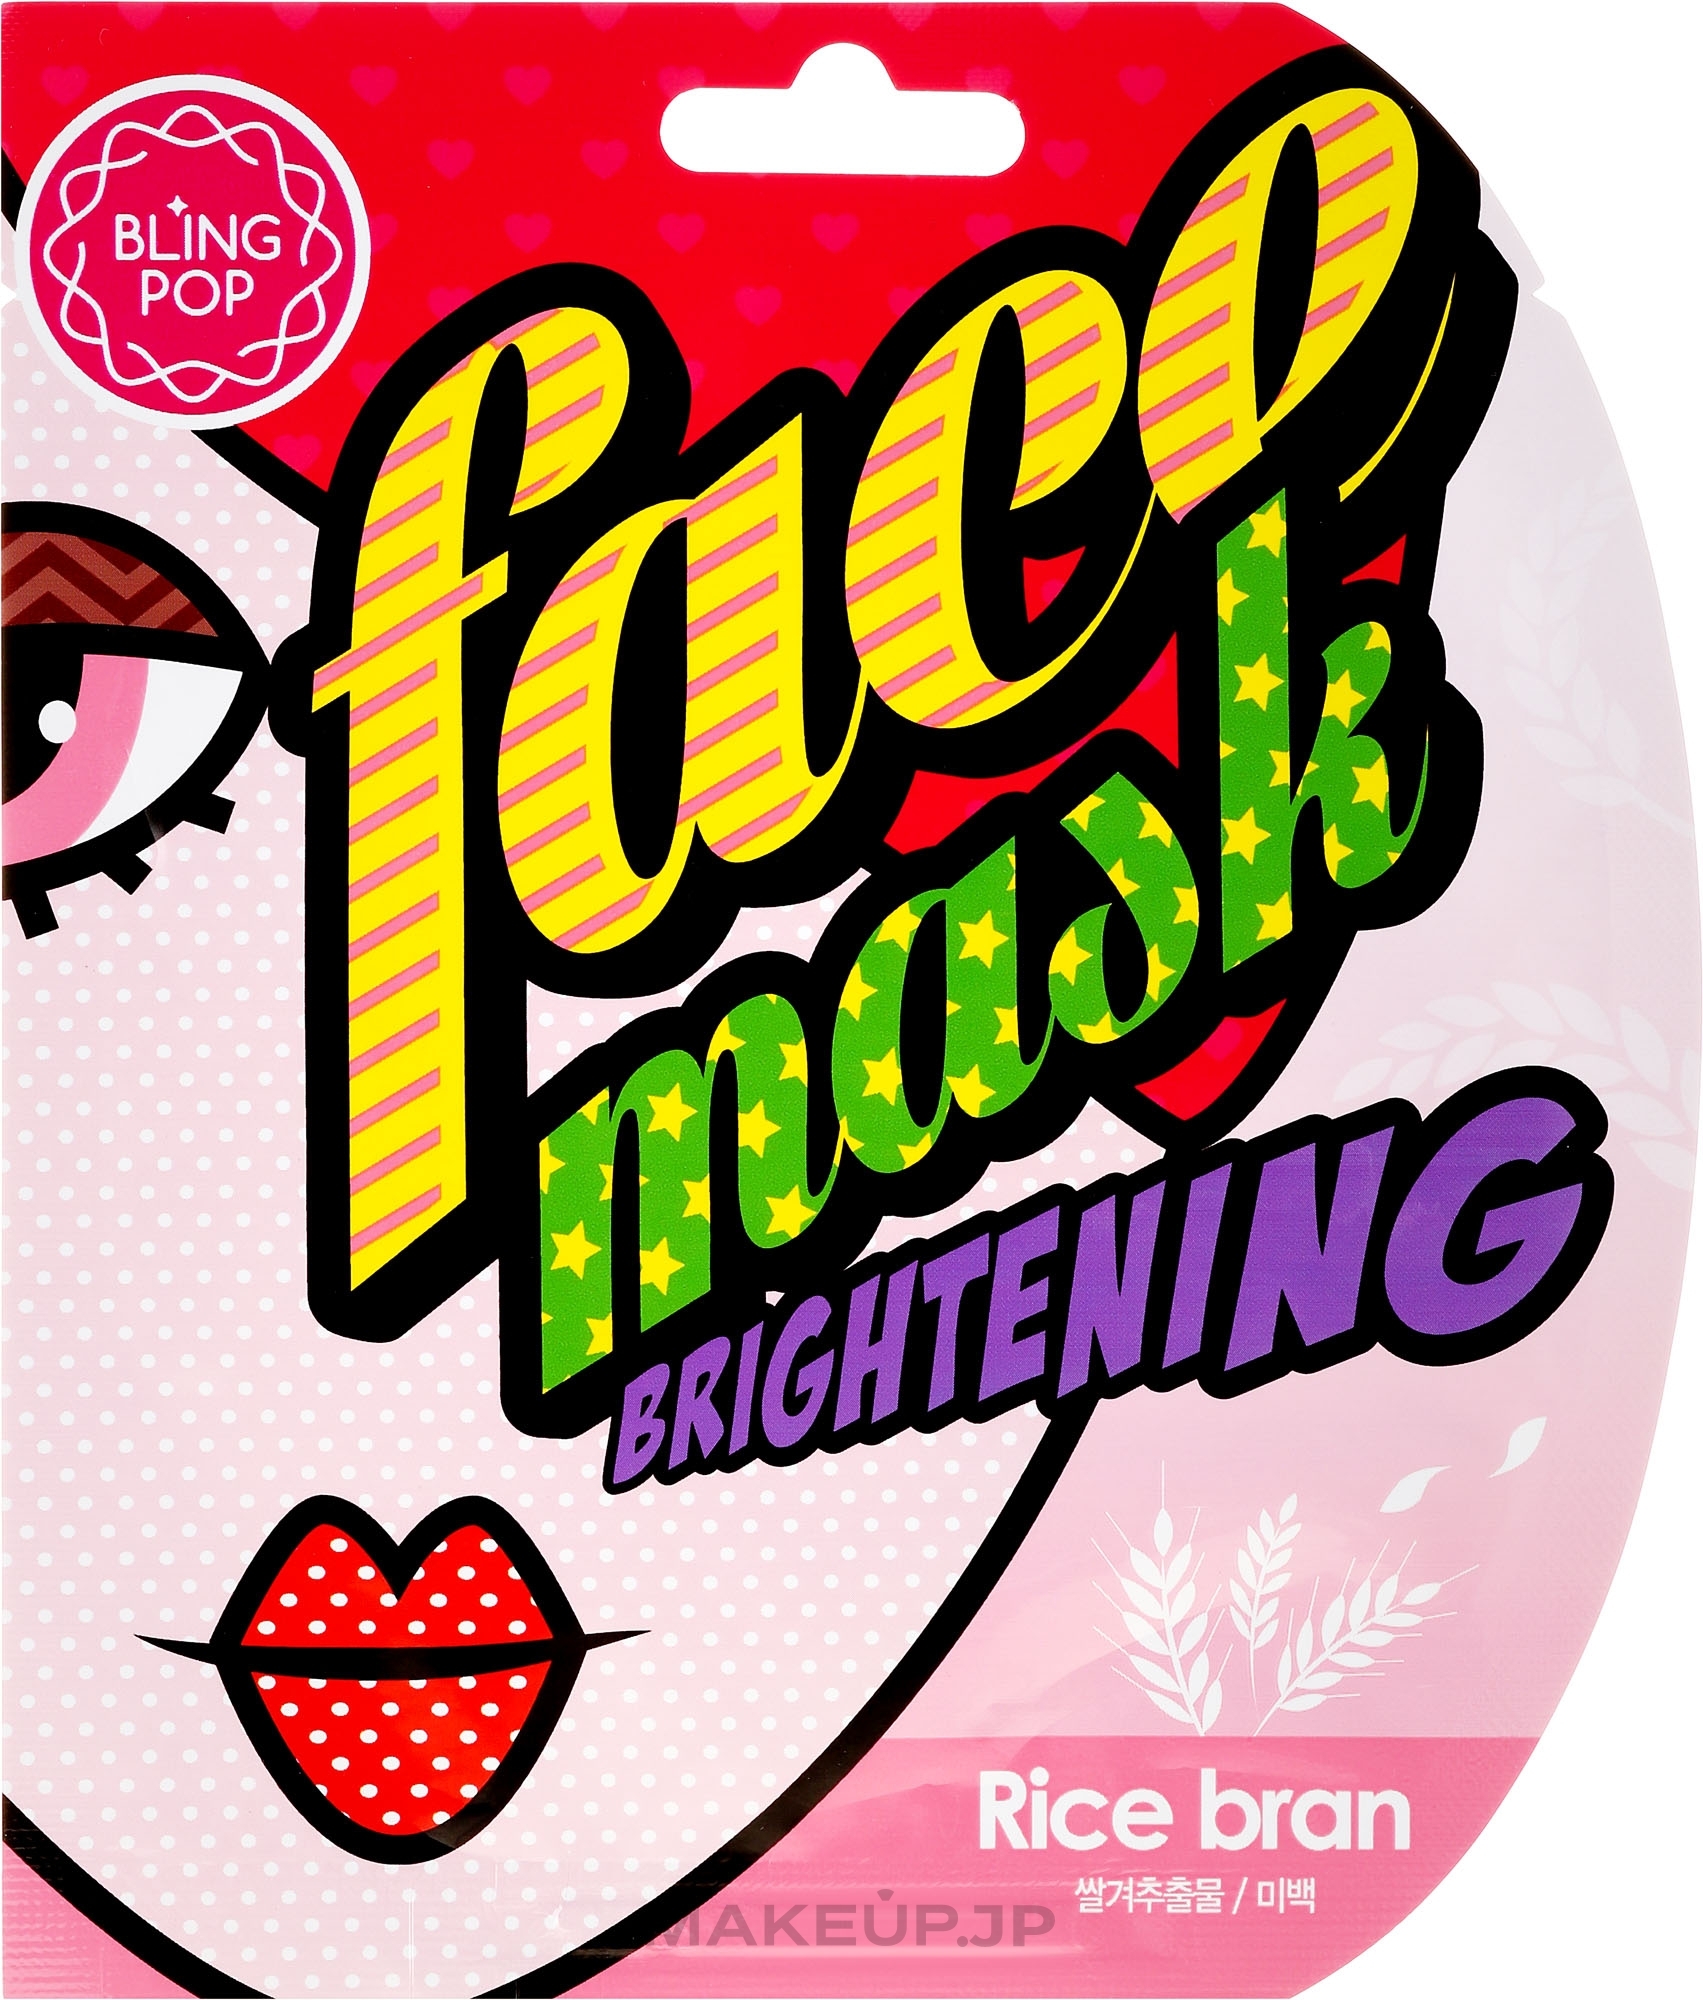 Whitening Face Mask with Rice Bran Extract - Bling Pop Rice Bran Brightening Face Mask — photo 25 ml